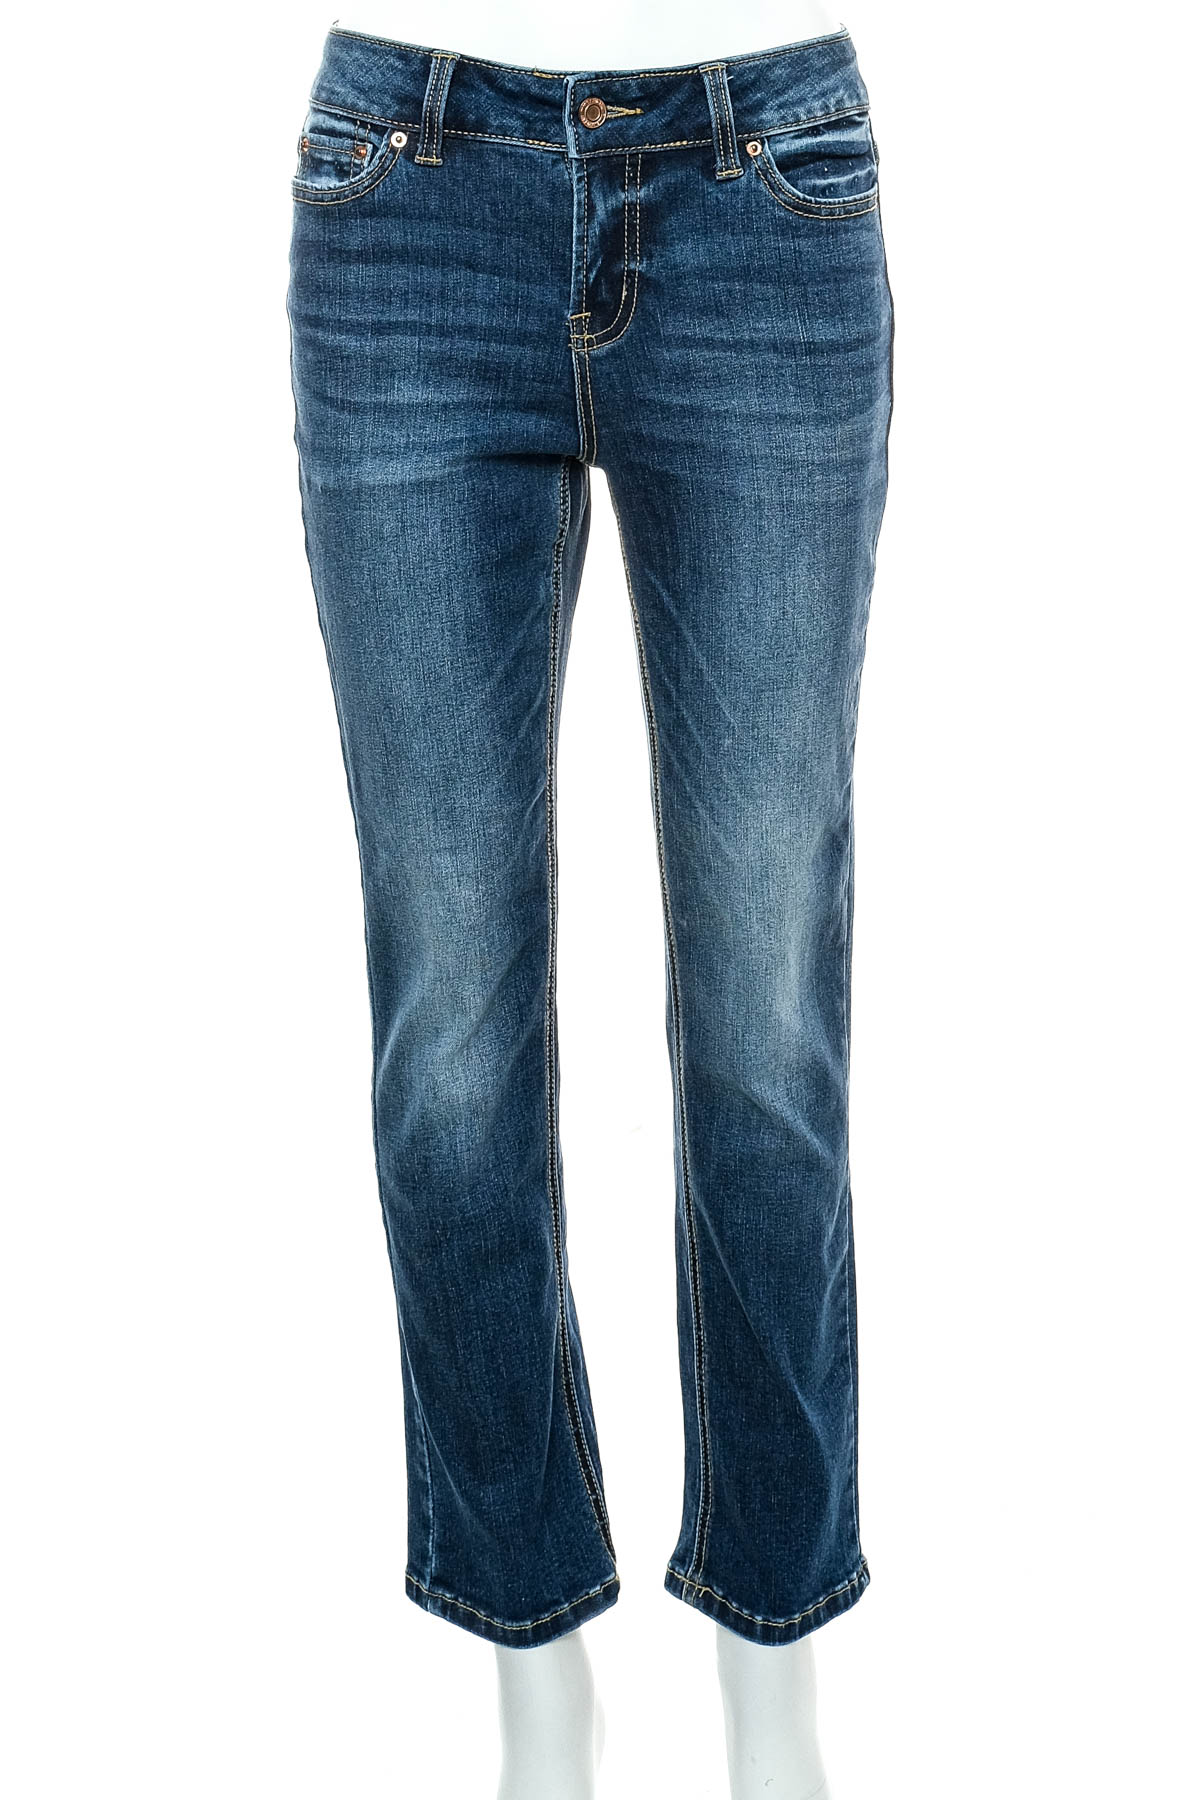 Women's jeans - TIME and TRU - 0